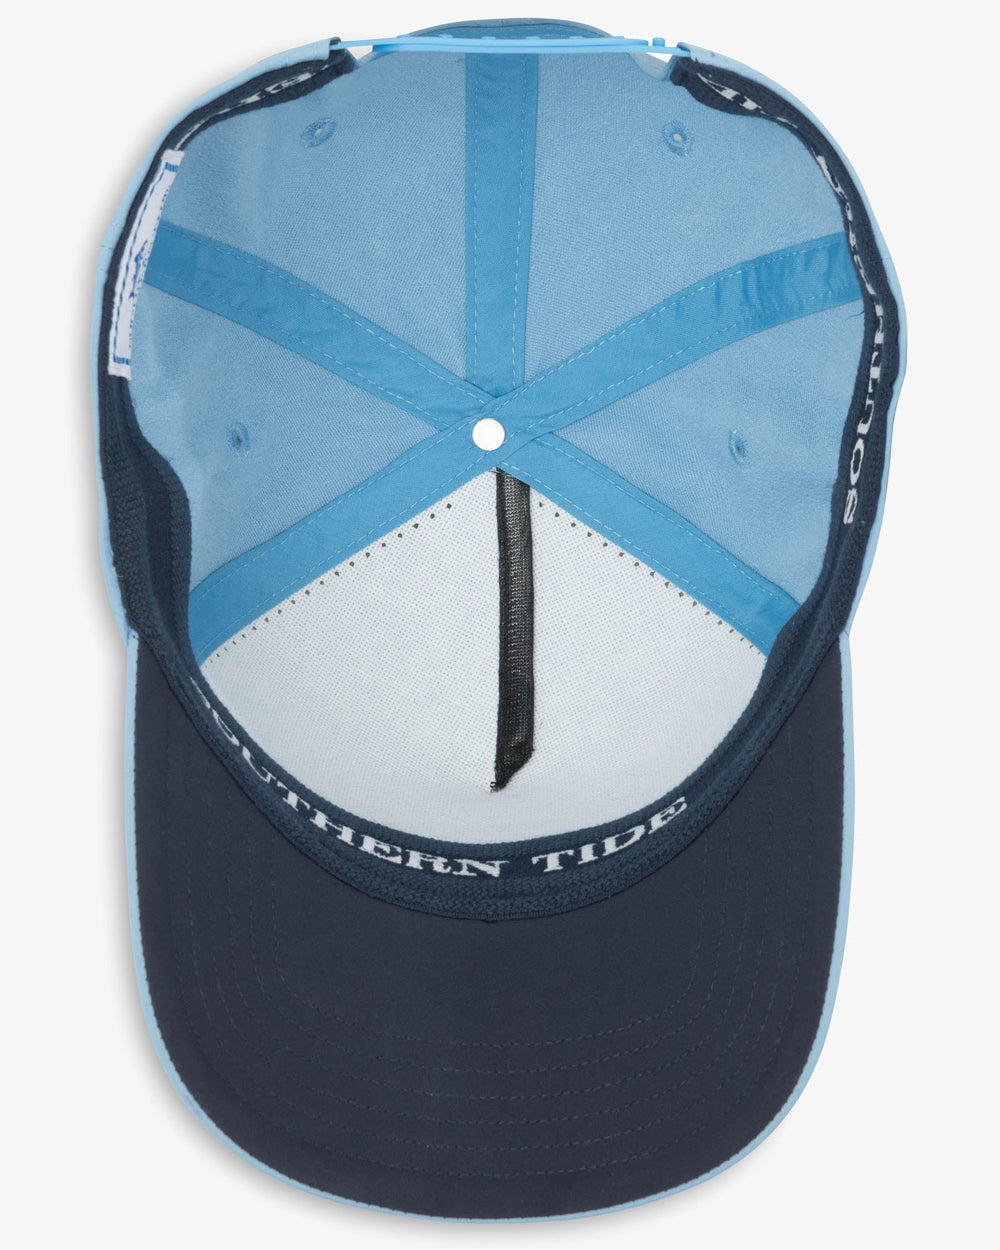 The interior view of the Garrison Perforated Performance Hat by Southern Tide - Light Blue